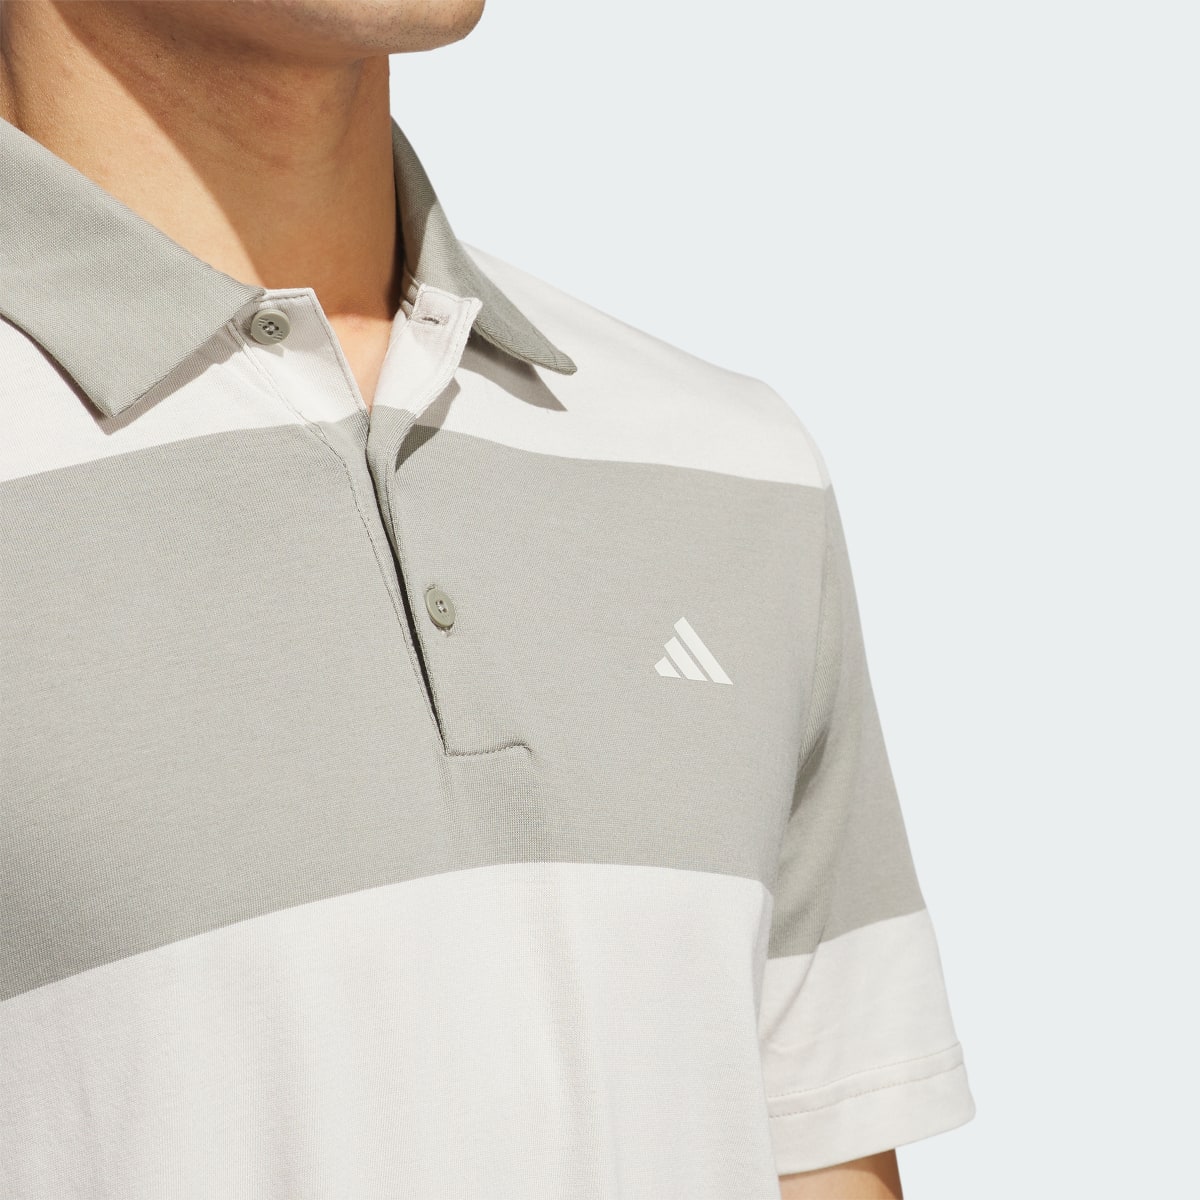 Adidas Colorblock Rugby Stripe Polo Shirt. 6